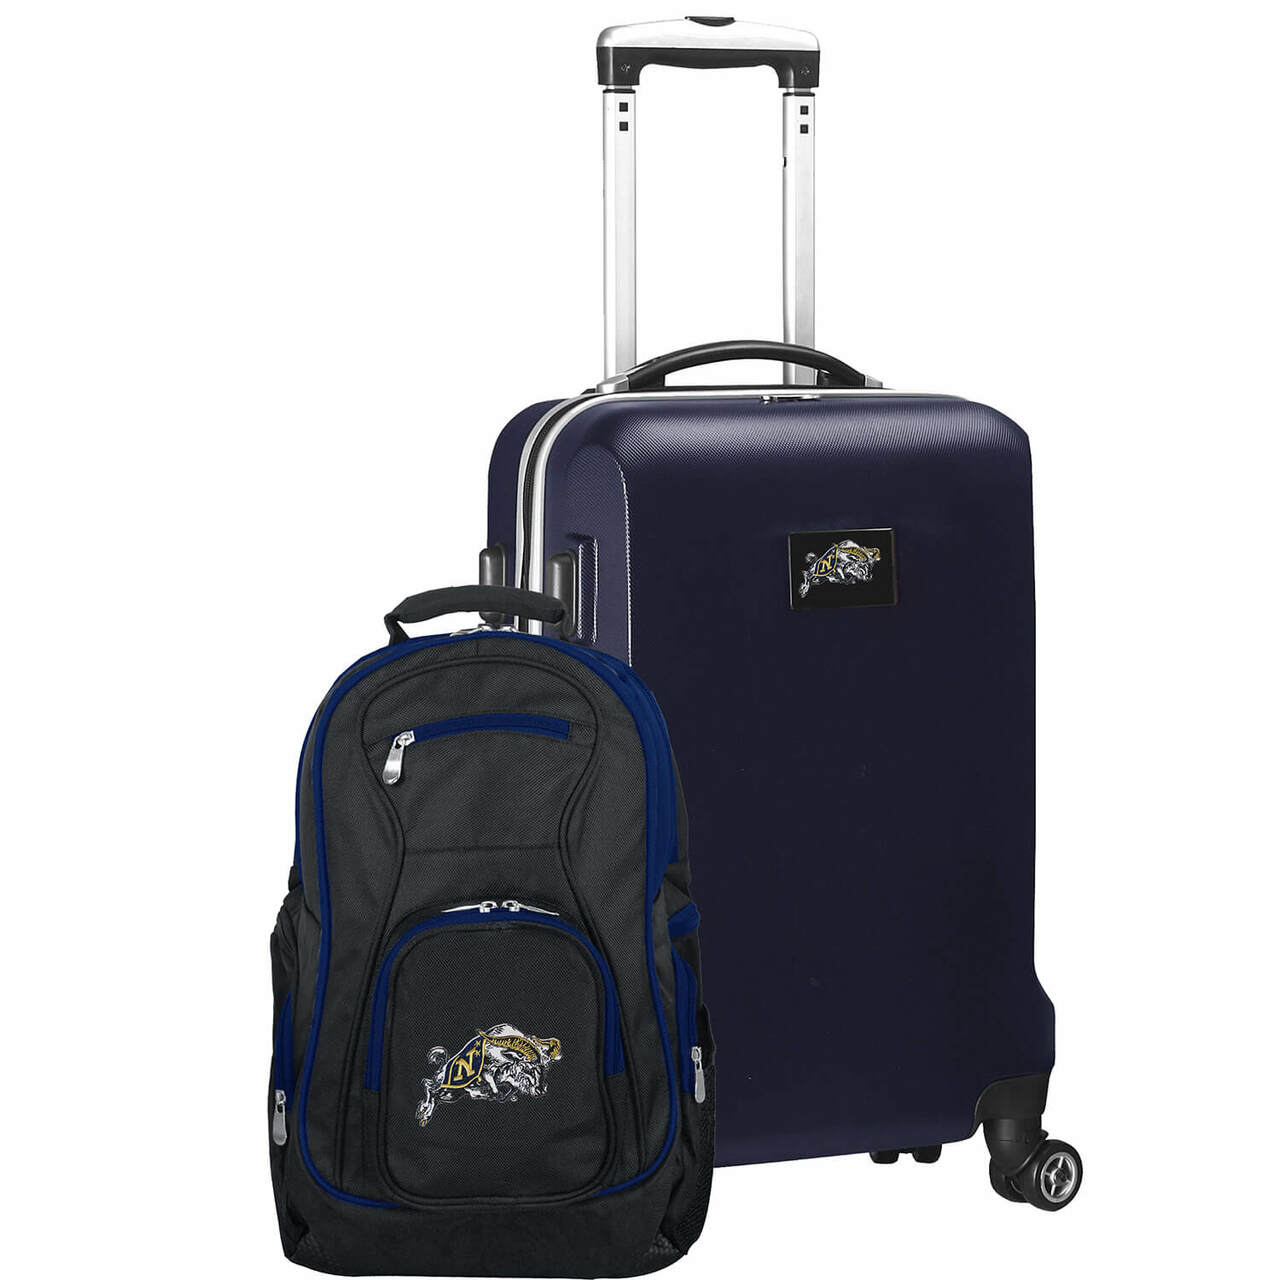 Navy Midshipmen Deluxe 2-Piece Backpack and Carry-on Set in Navy